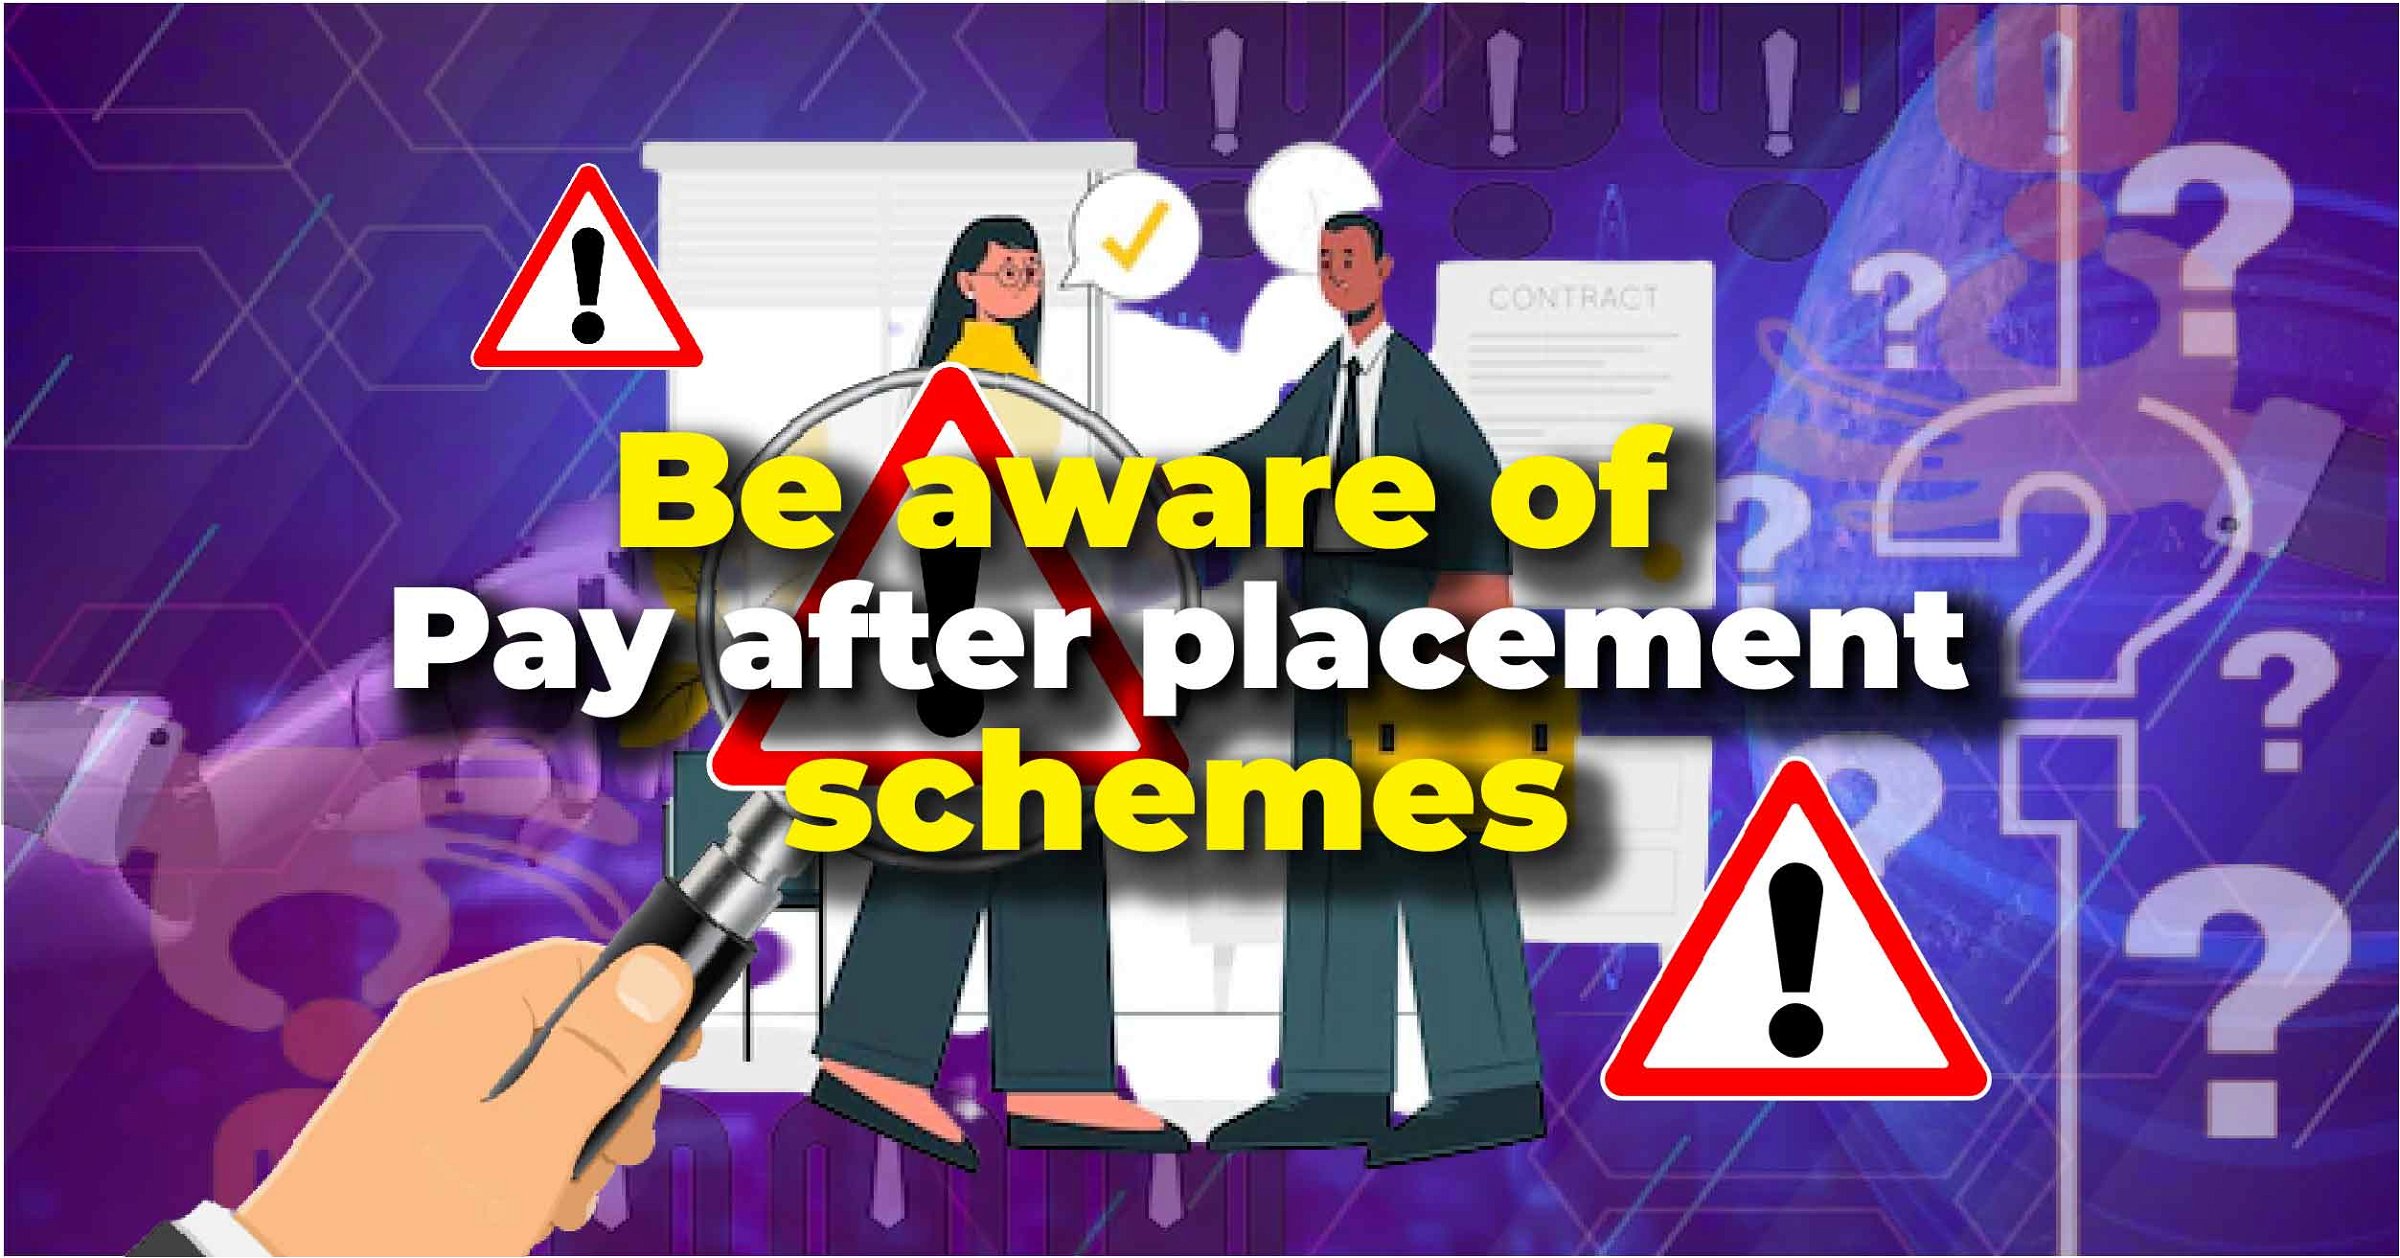 Be aware of pay after placement schemes